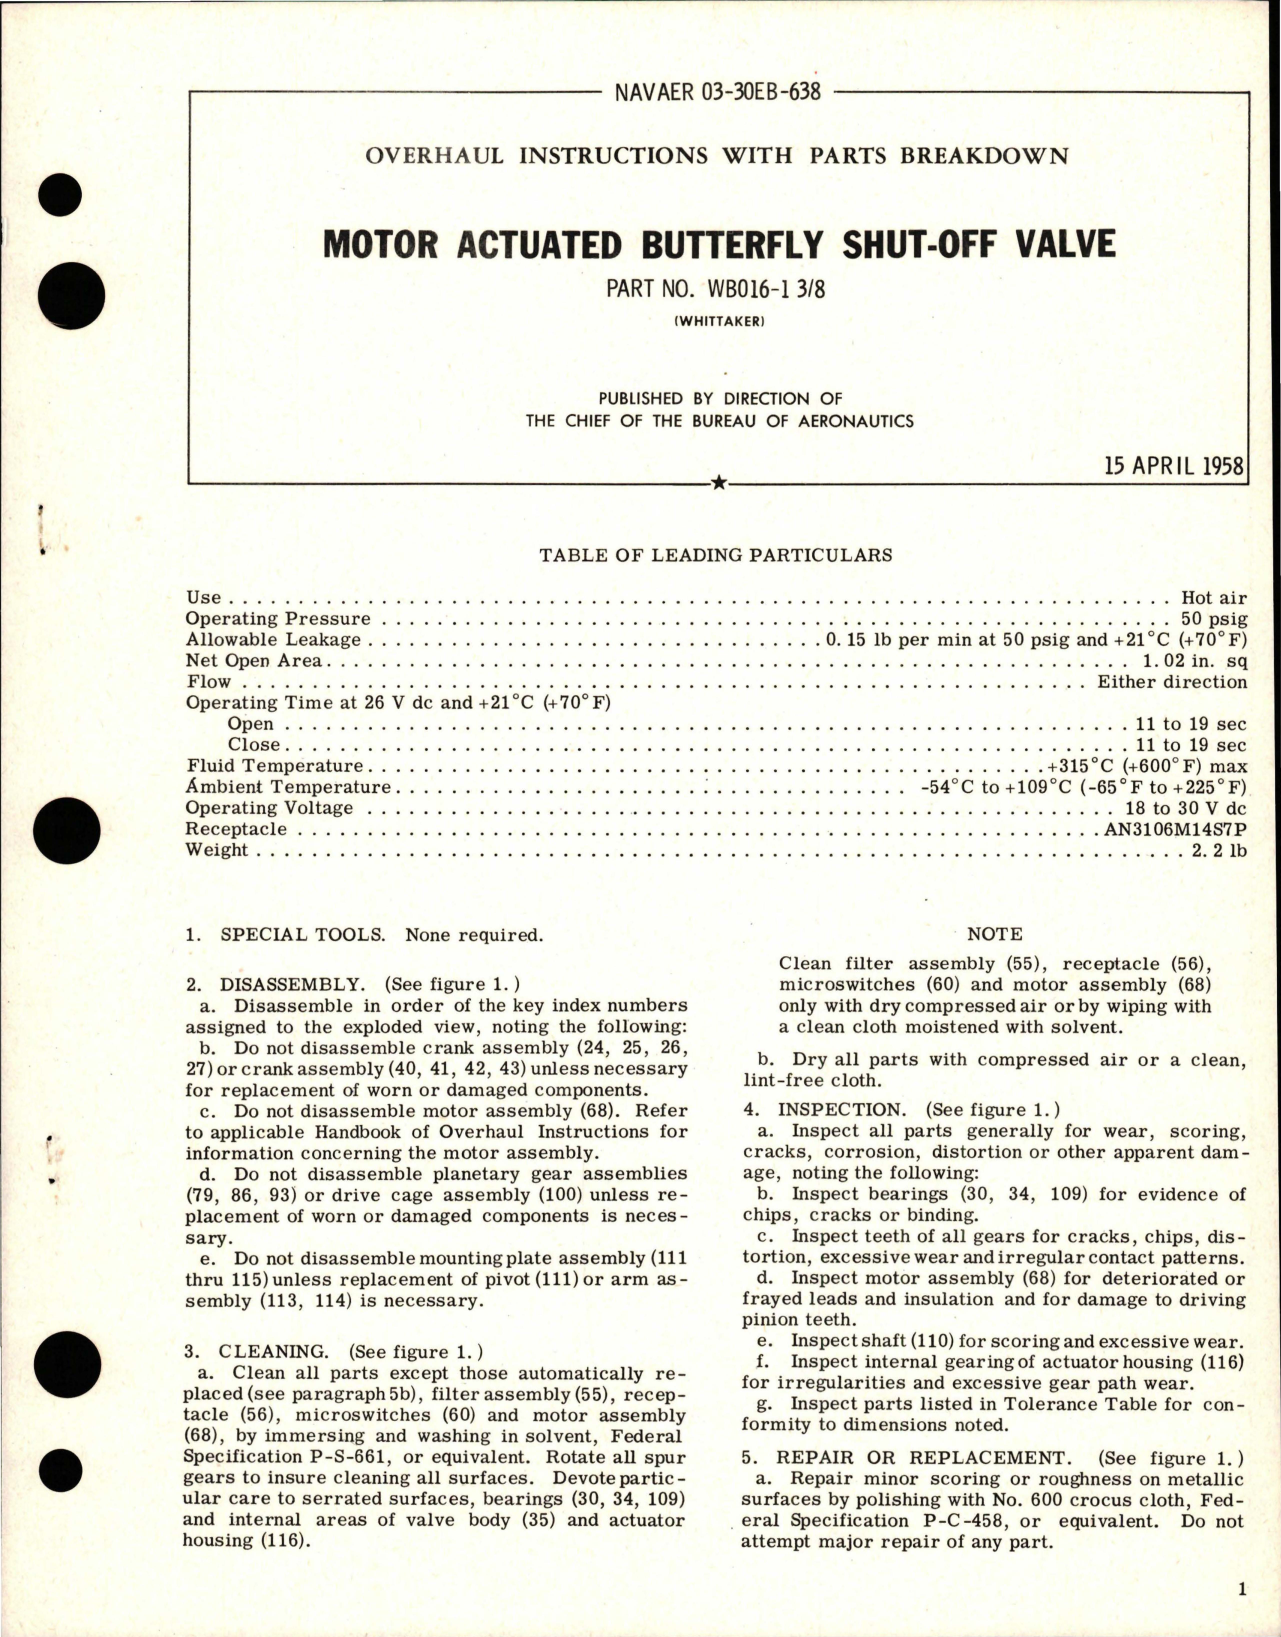 Sample page 1 from AirCorps Library document: Overhaul Instructions with Parts for Motor Actuated Butterfly Shut Off Valve - Part WB016-1 3-8